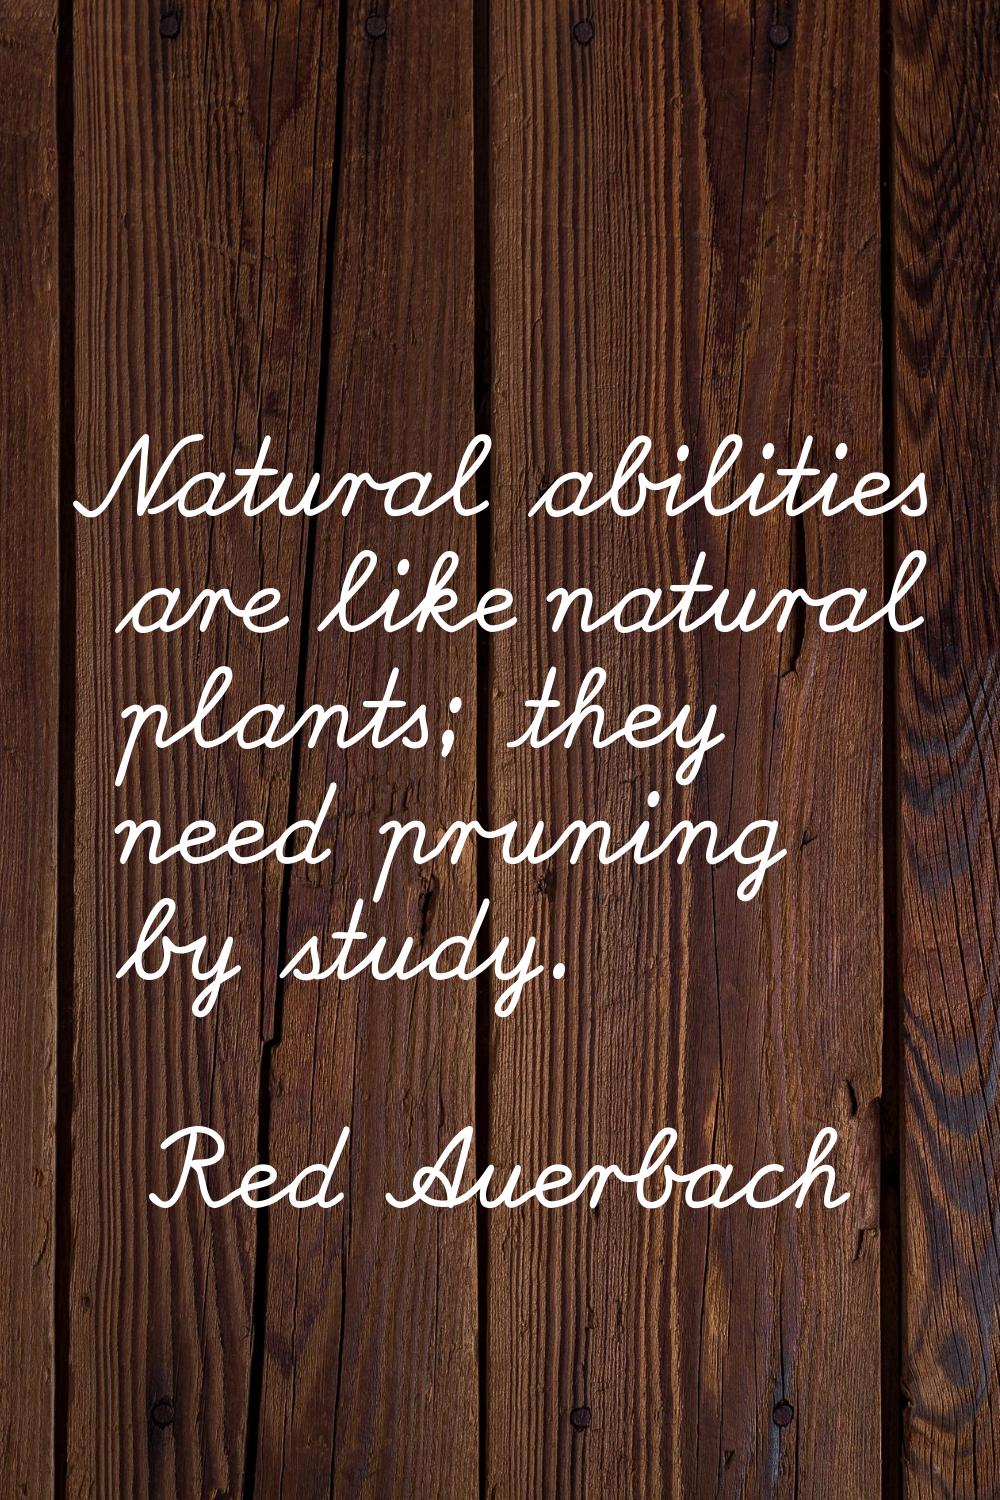 Natural abilities are like natural plants; they need pruning by study.